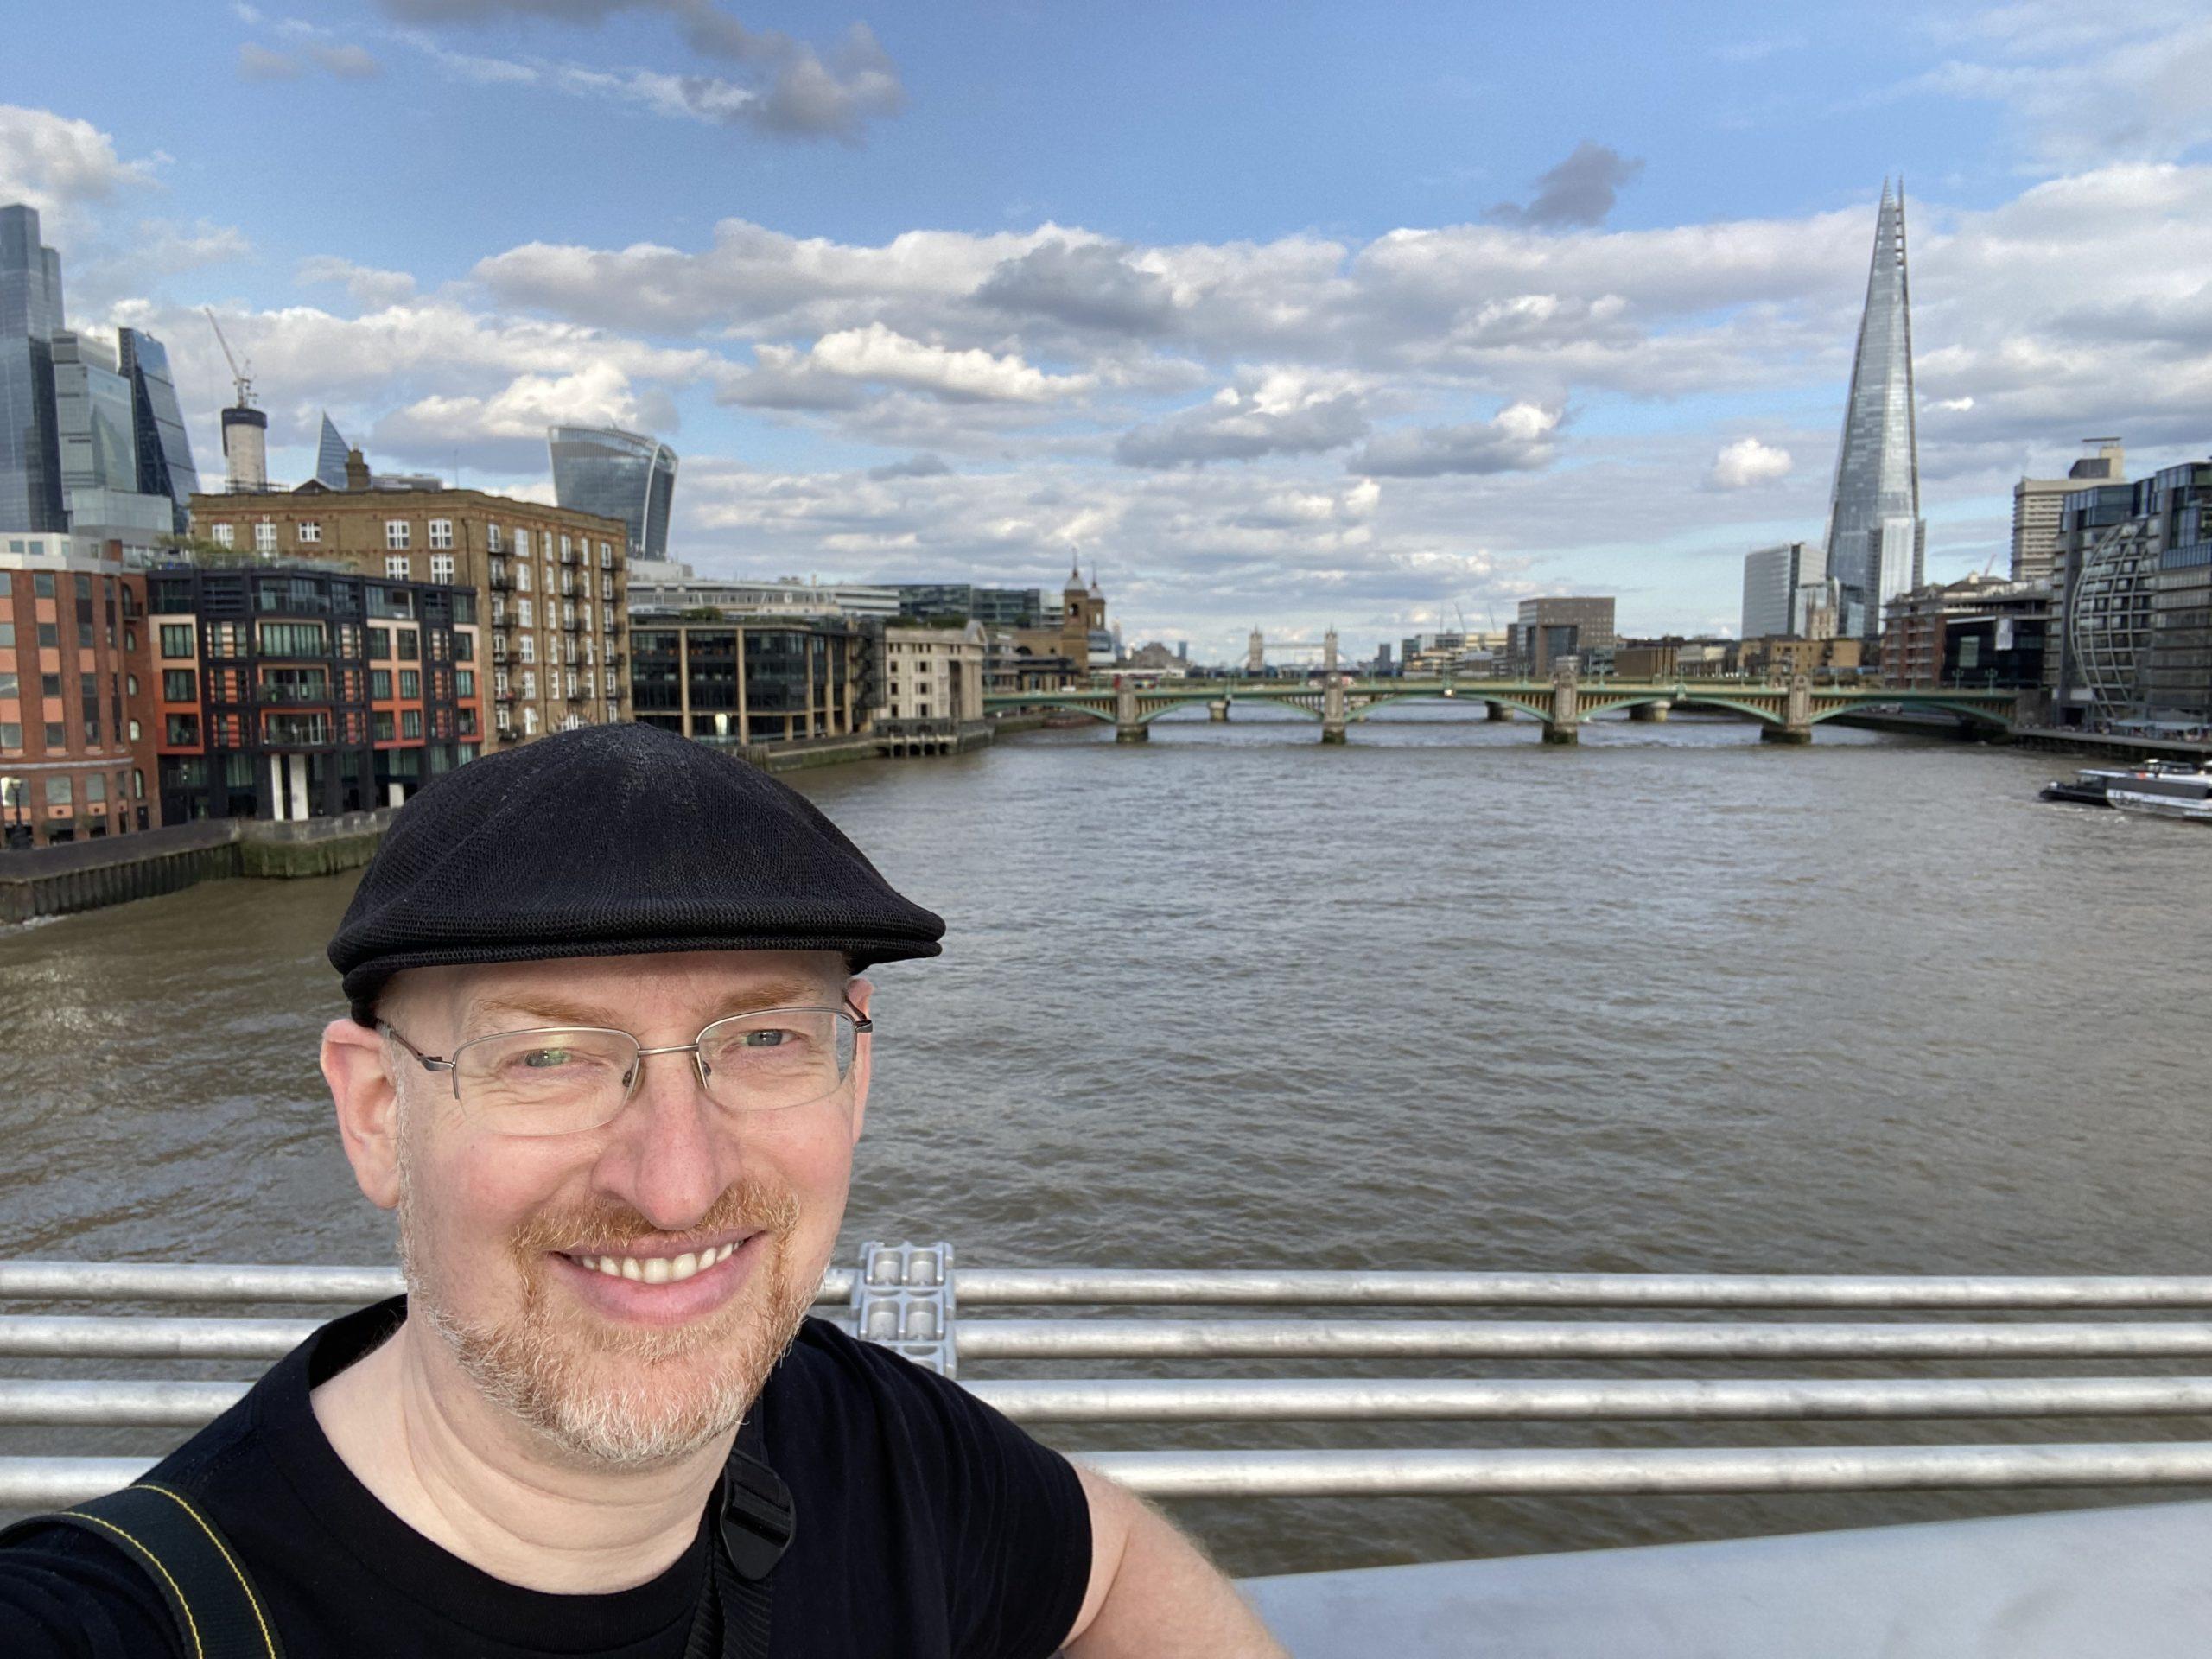 Me midway across the Millennium Bridge, with the Shard and Tower Bridge visible in the distance.